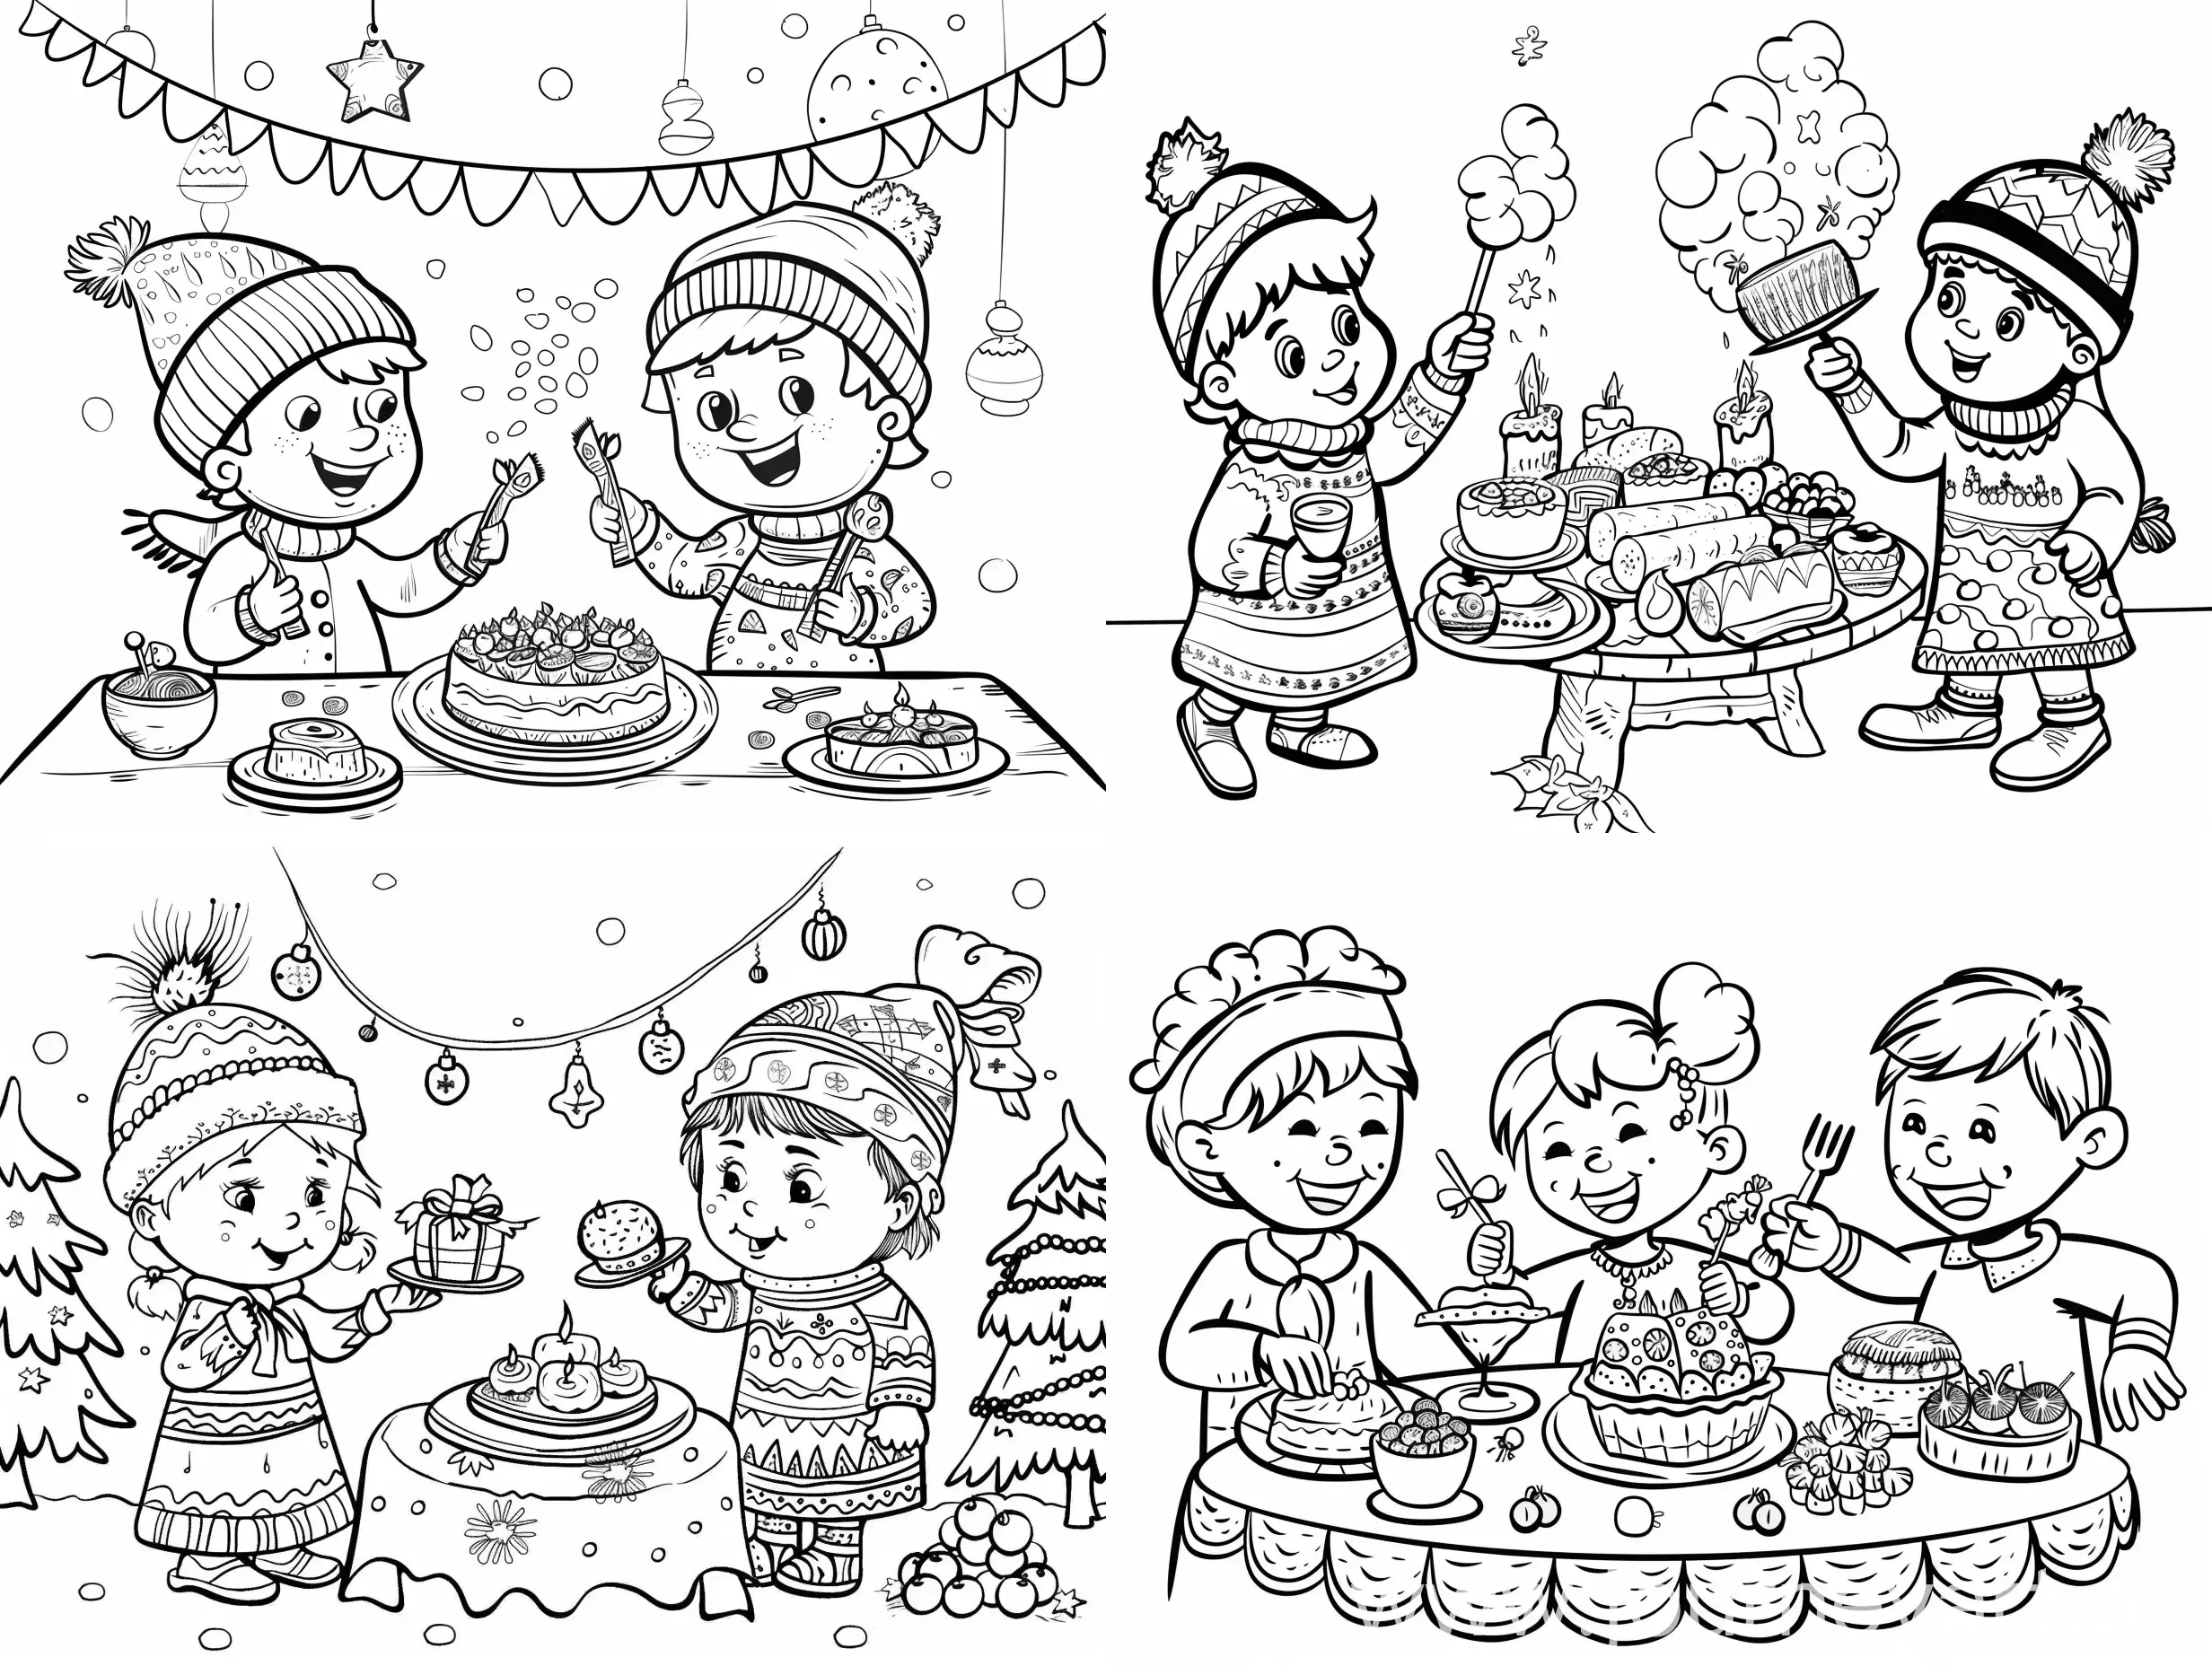 coloring page for kids,low detailed, simply cartoon style, isolated, funny, дети празднуют масленицу